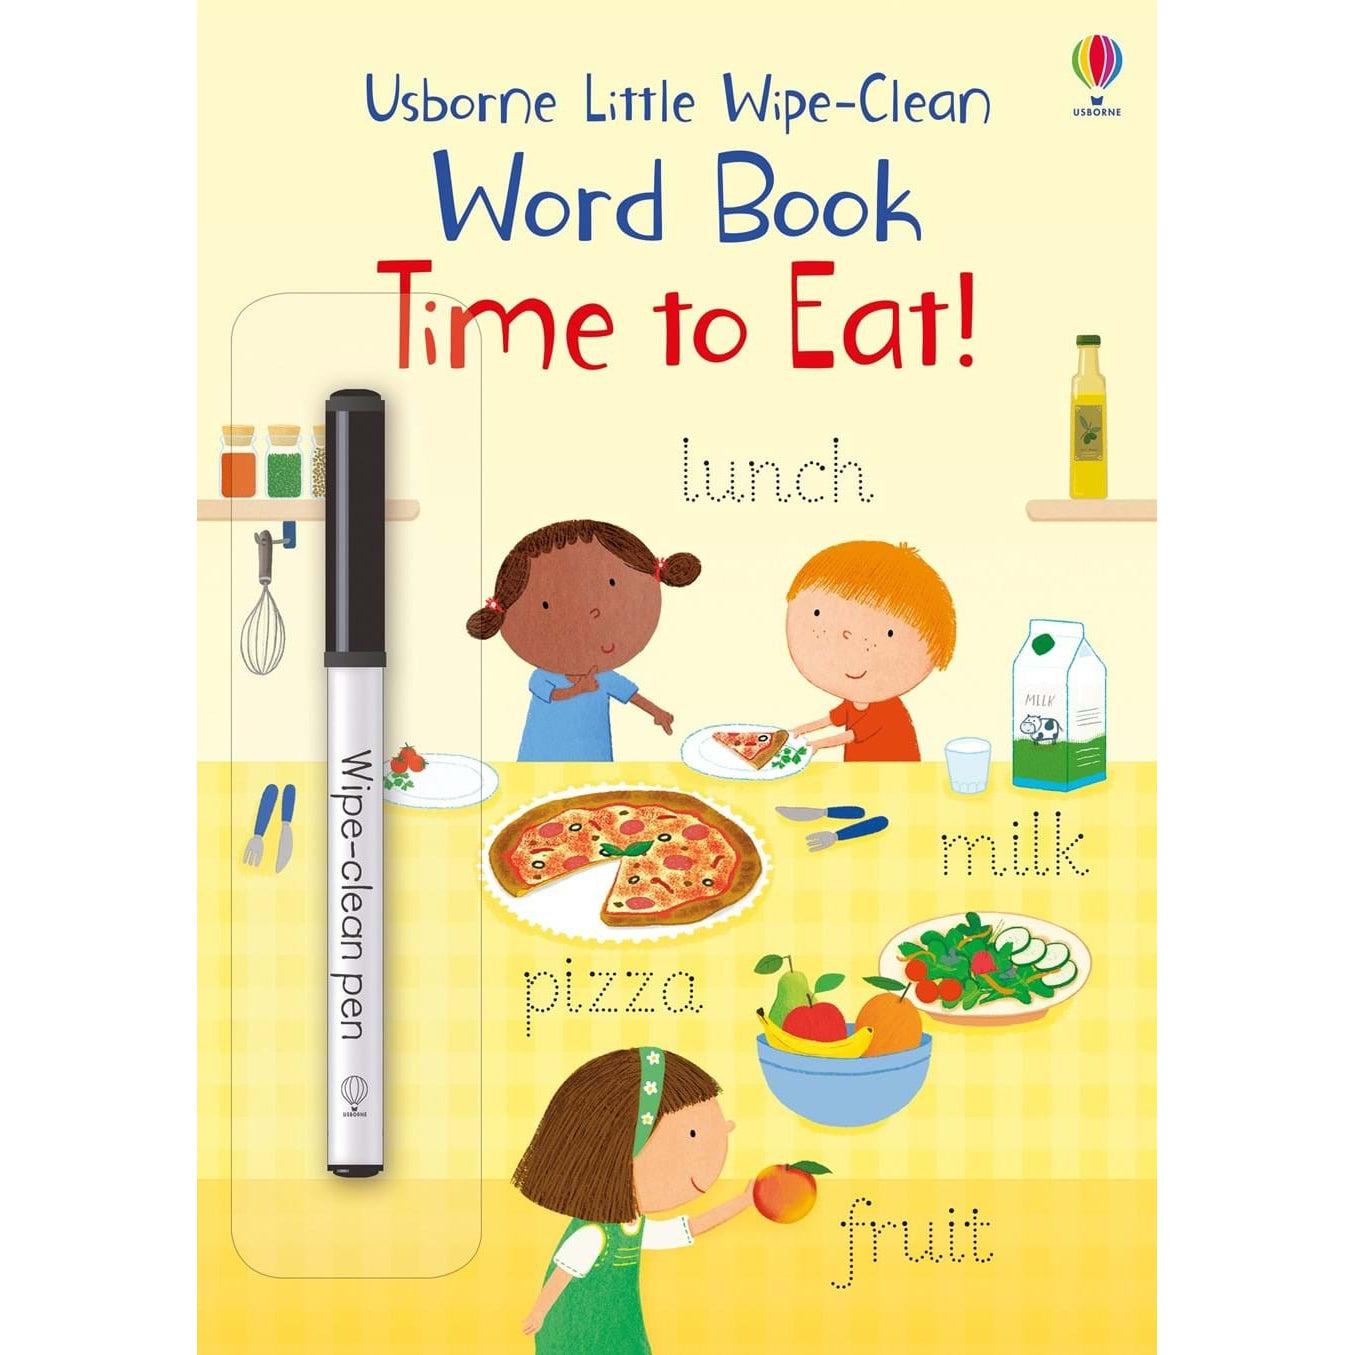 Little Wipe-Clean Word Book Time To Eat!